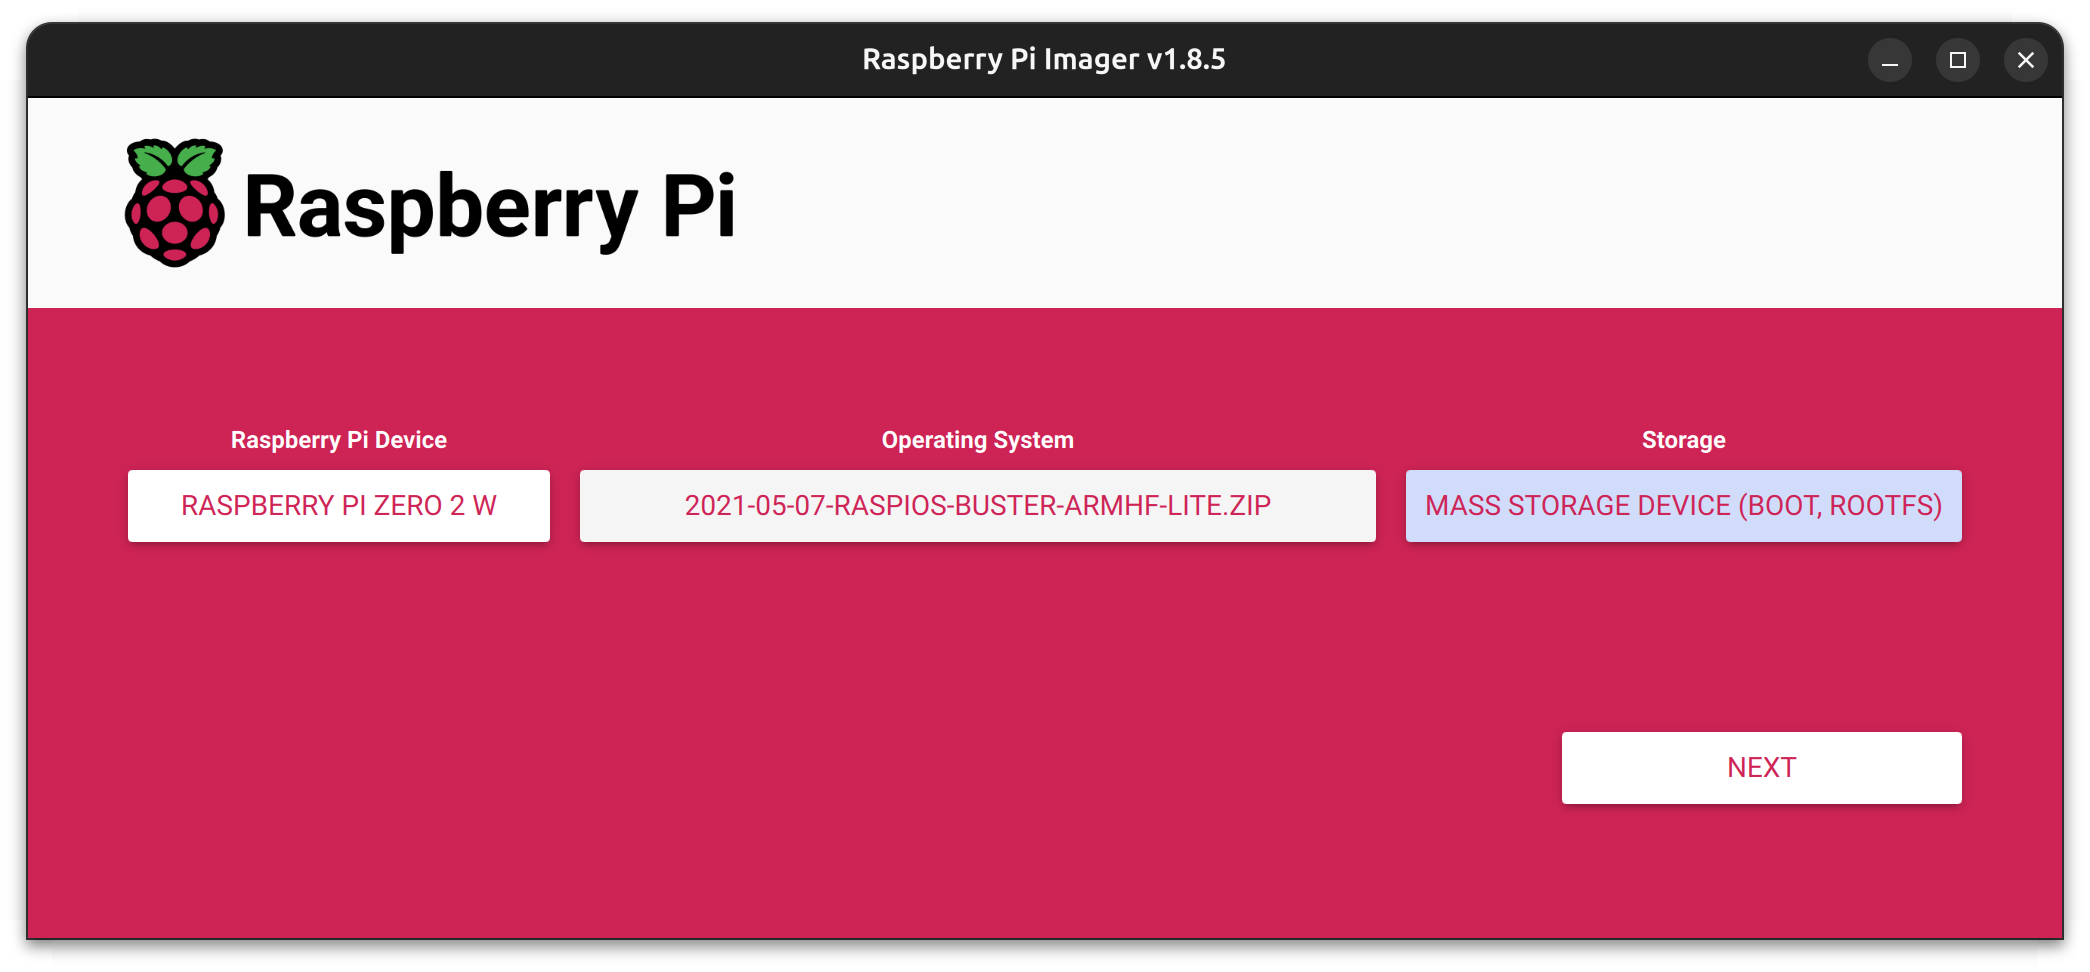 Pi Imager Overview